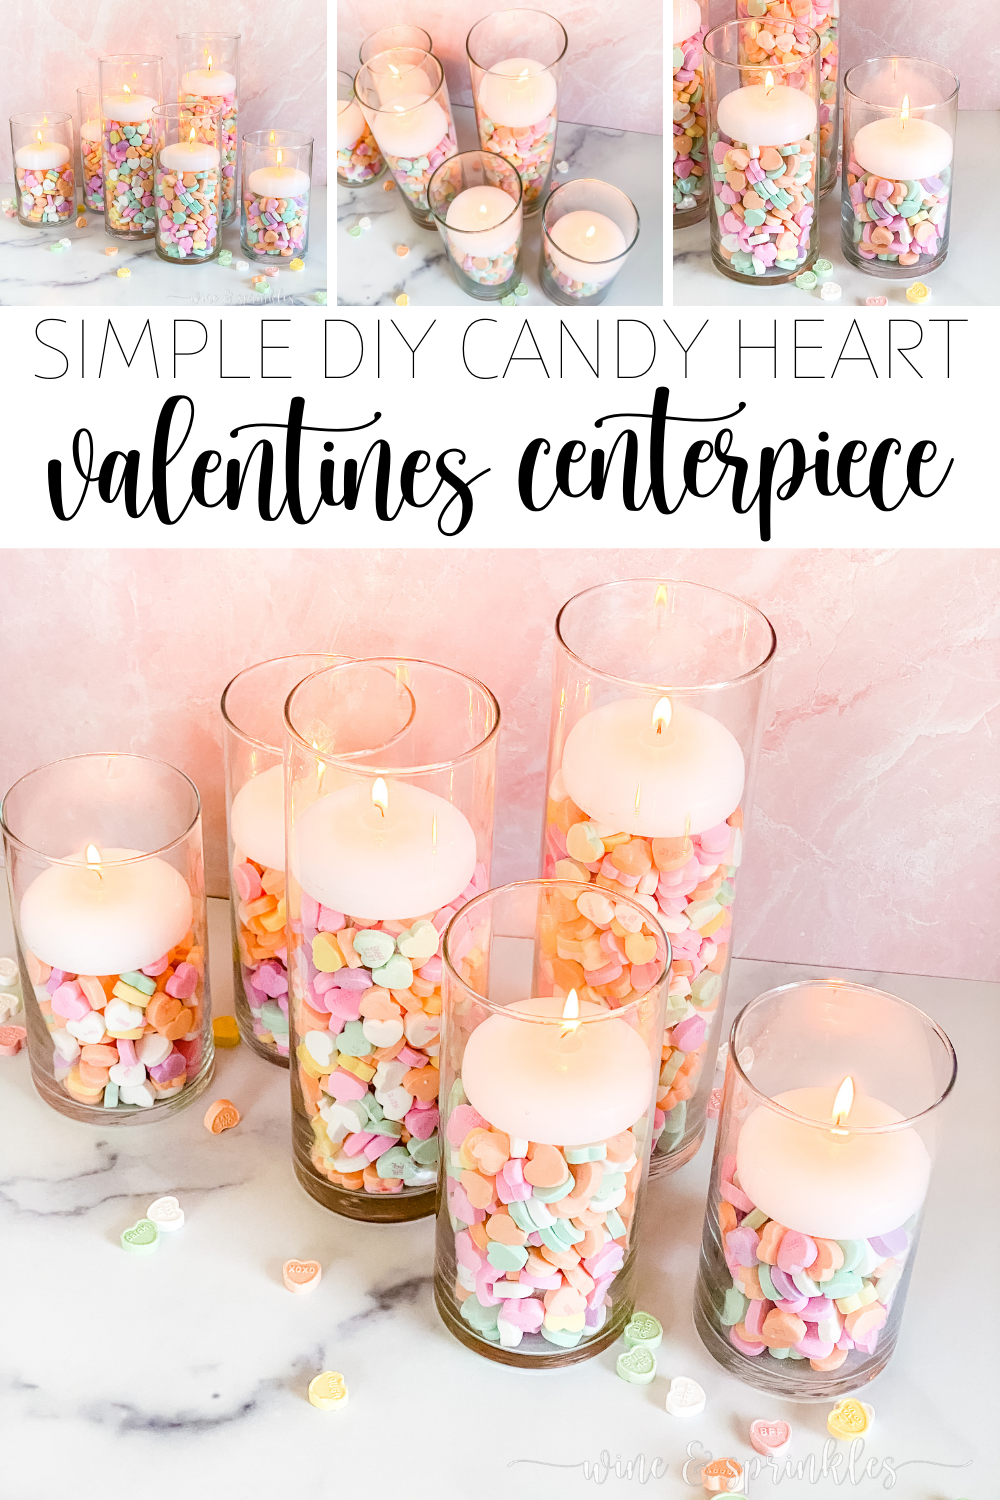 Make Valentine Table Decorations From Tea Candles & Colored Card